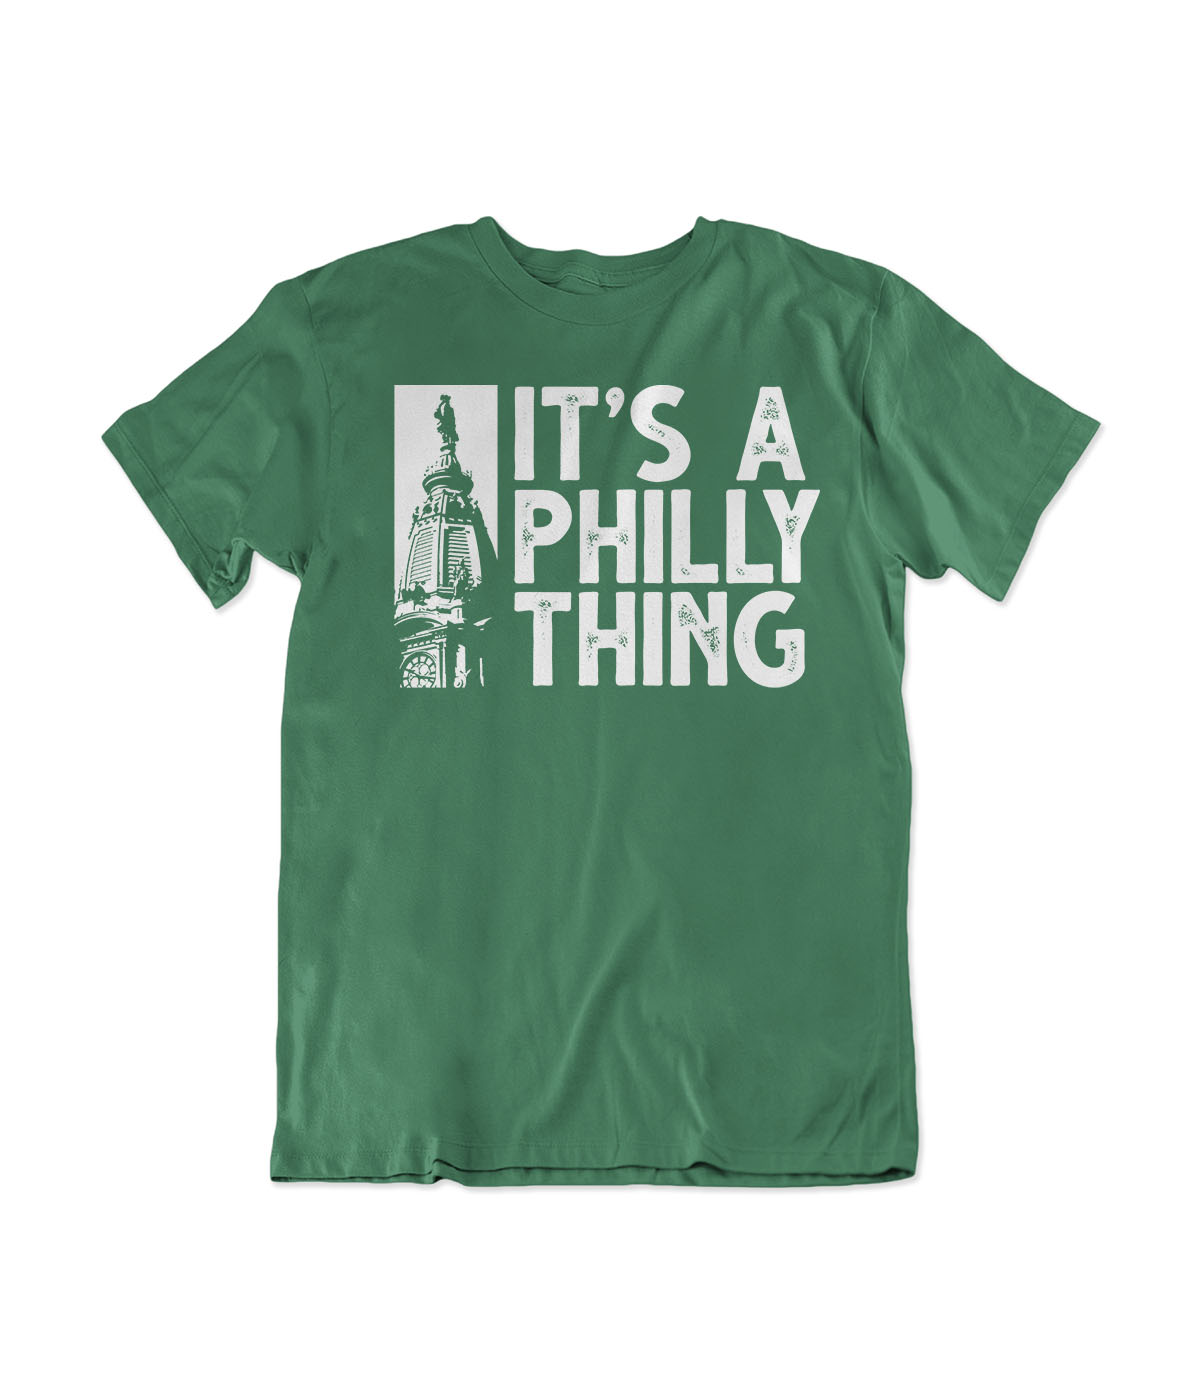 Philly Thing (SB)